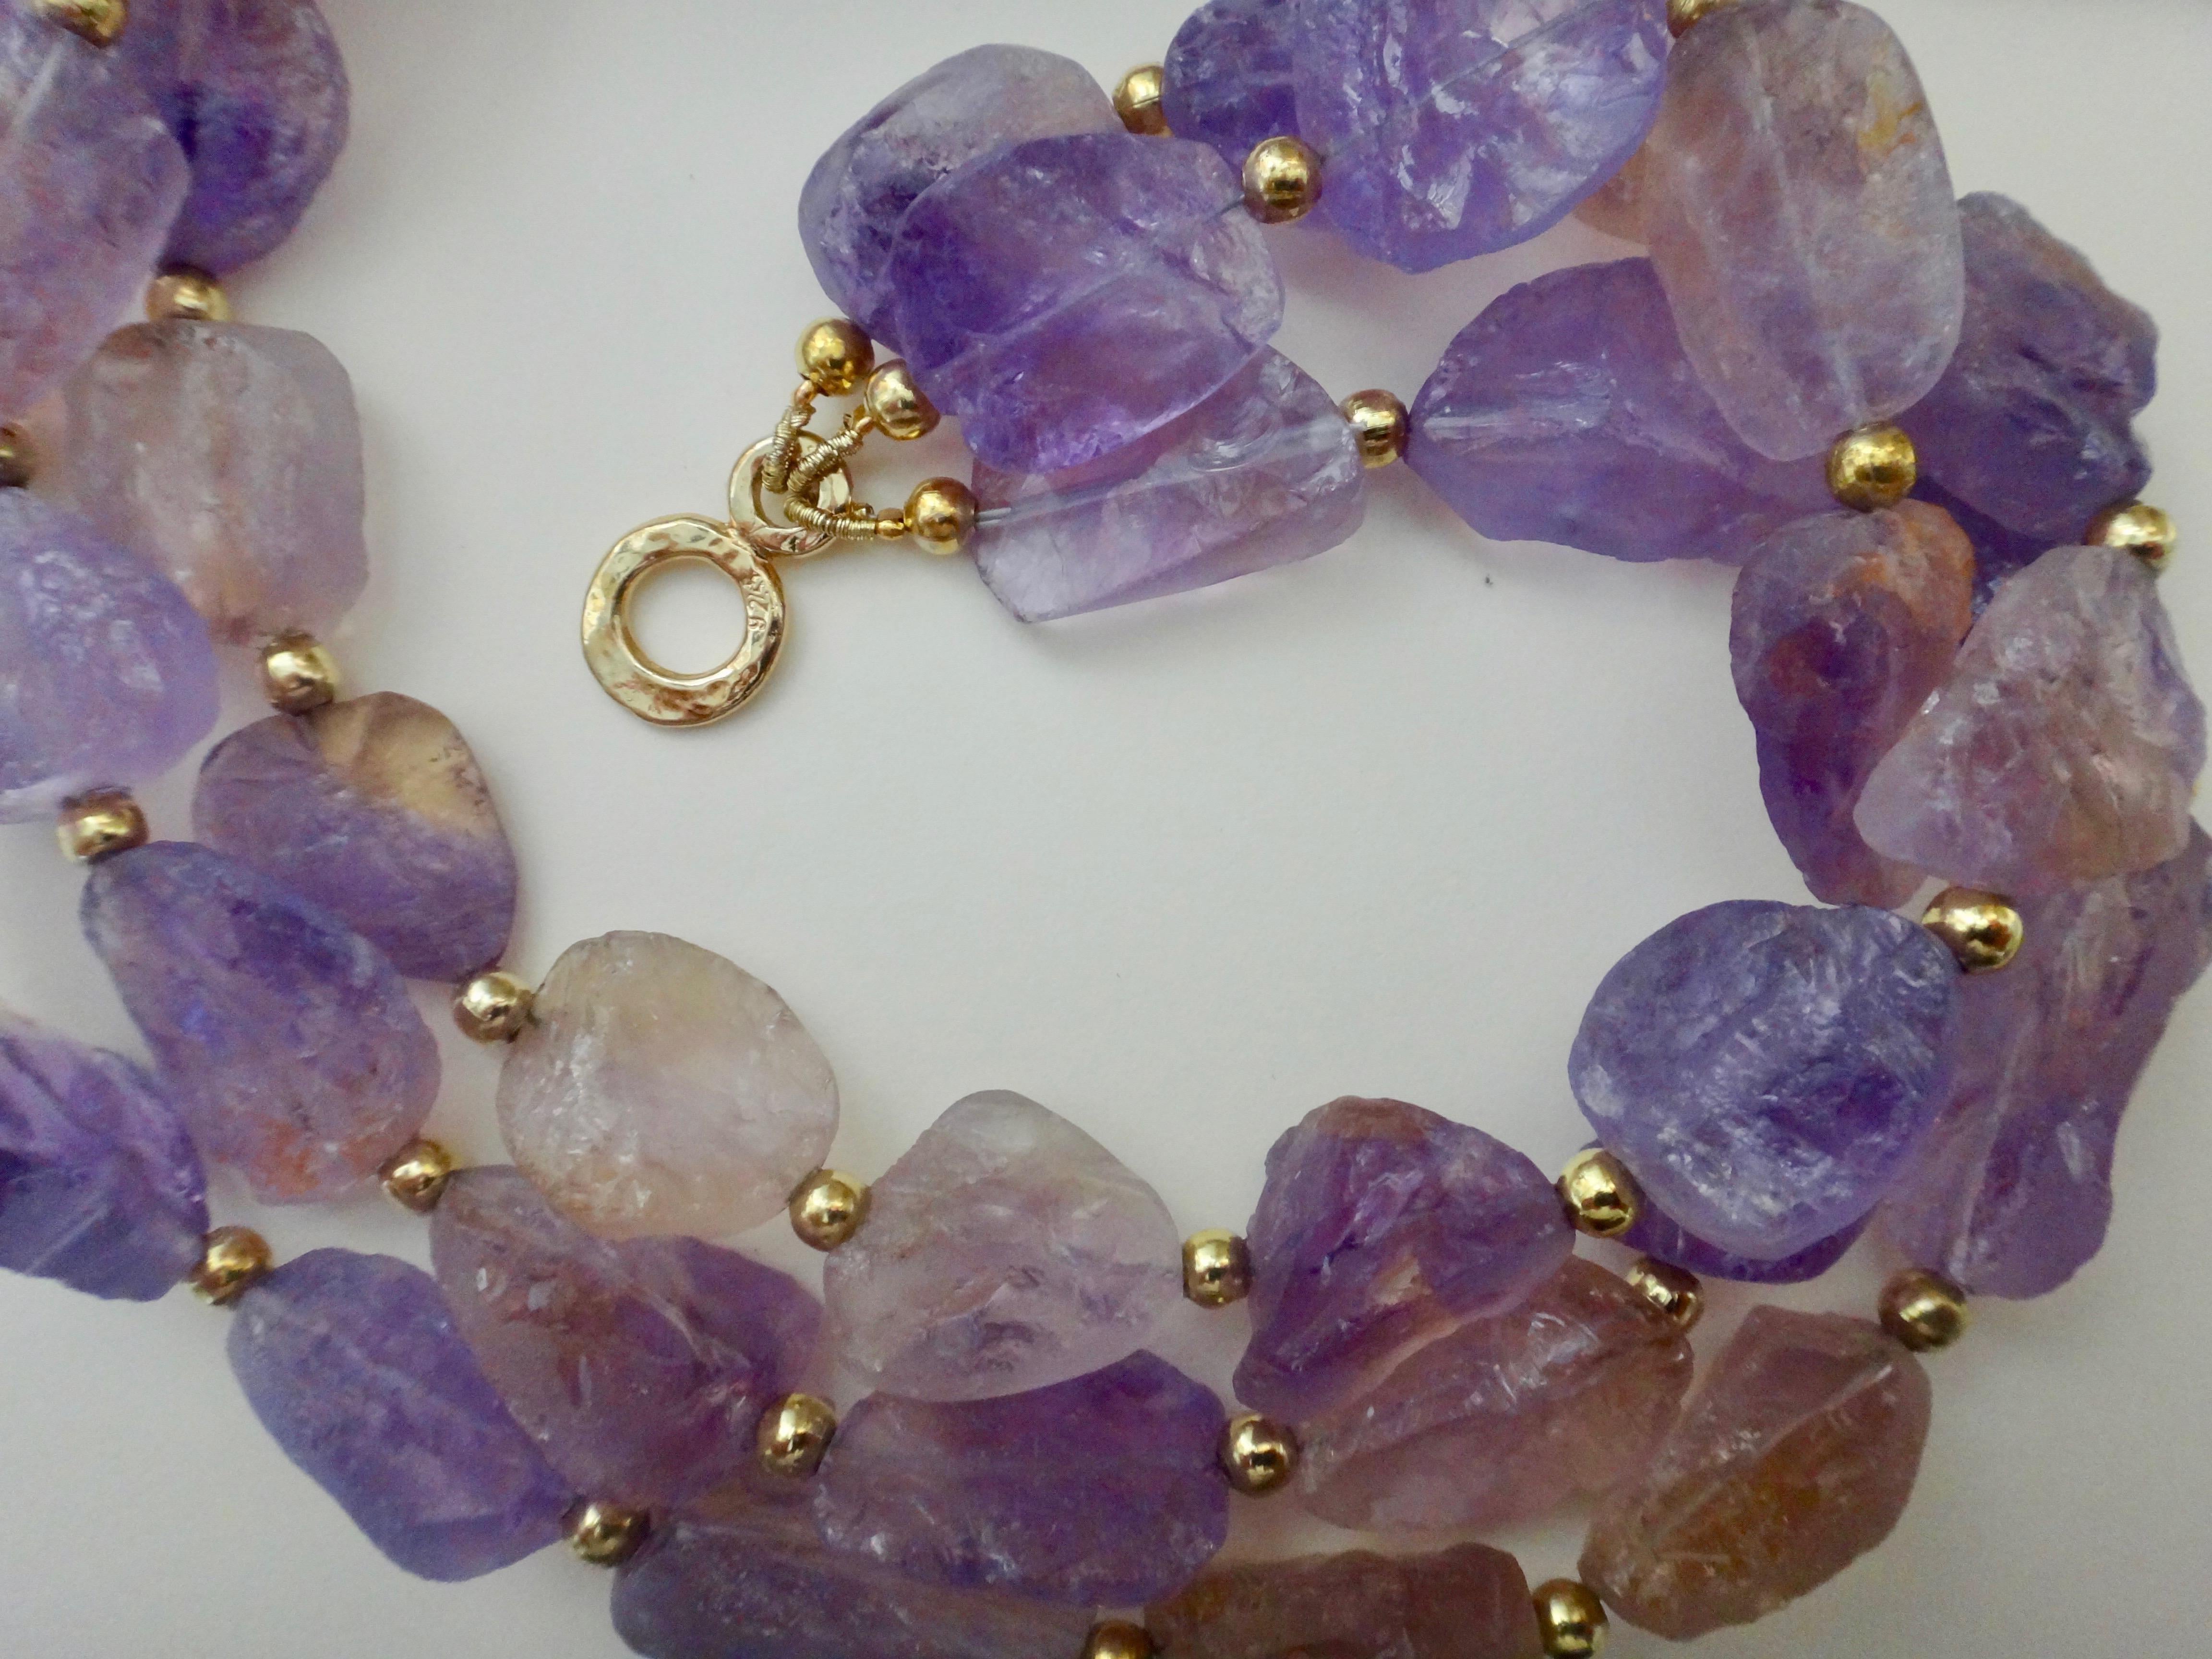 Offered here is a three strand ametrine (origin: Bolivia) torsade necklace.  Ametrine refers to the fact that both amethyst and citrine appear side by side in the same stone.  The beads were created in a process called 